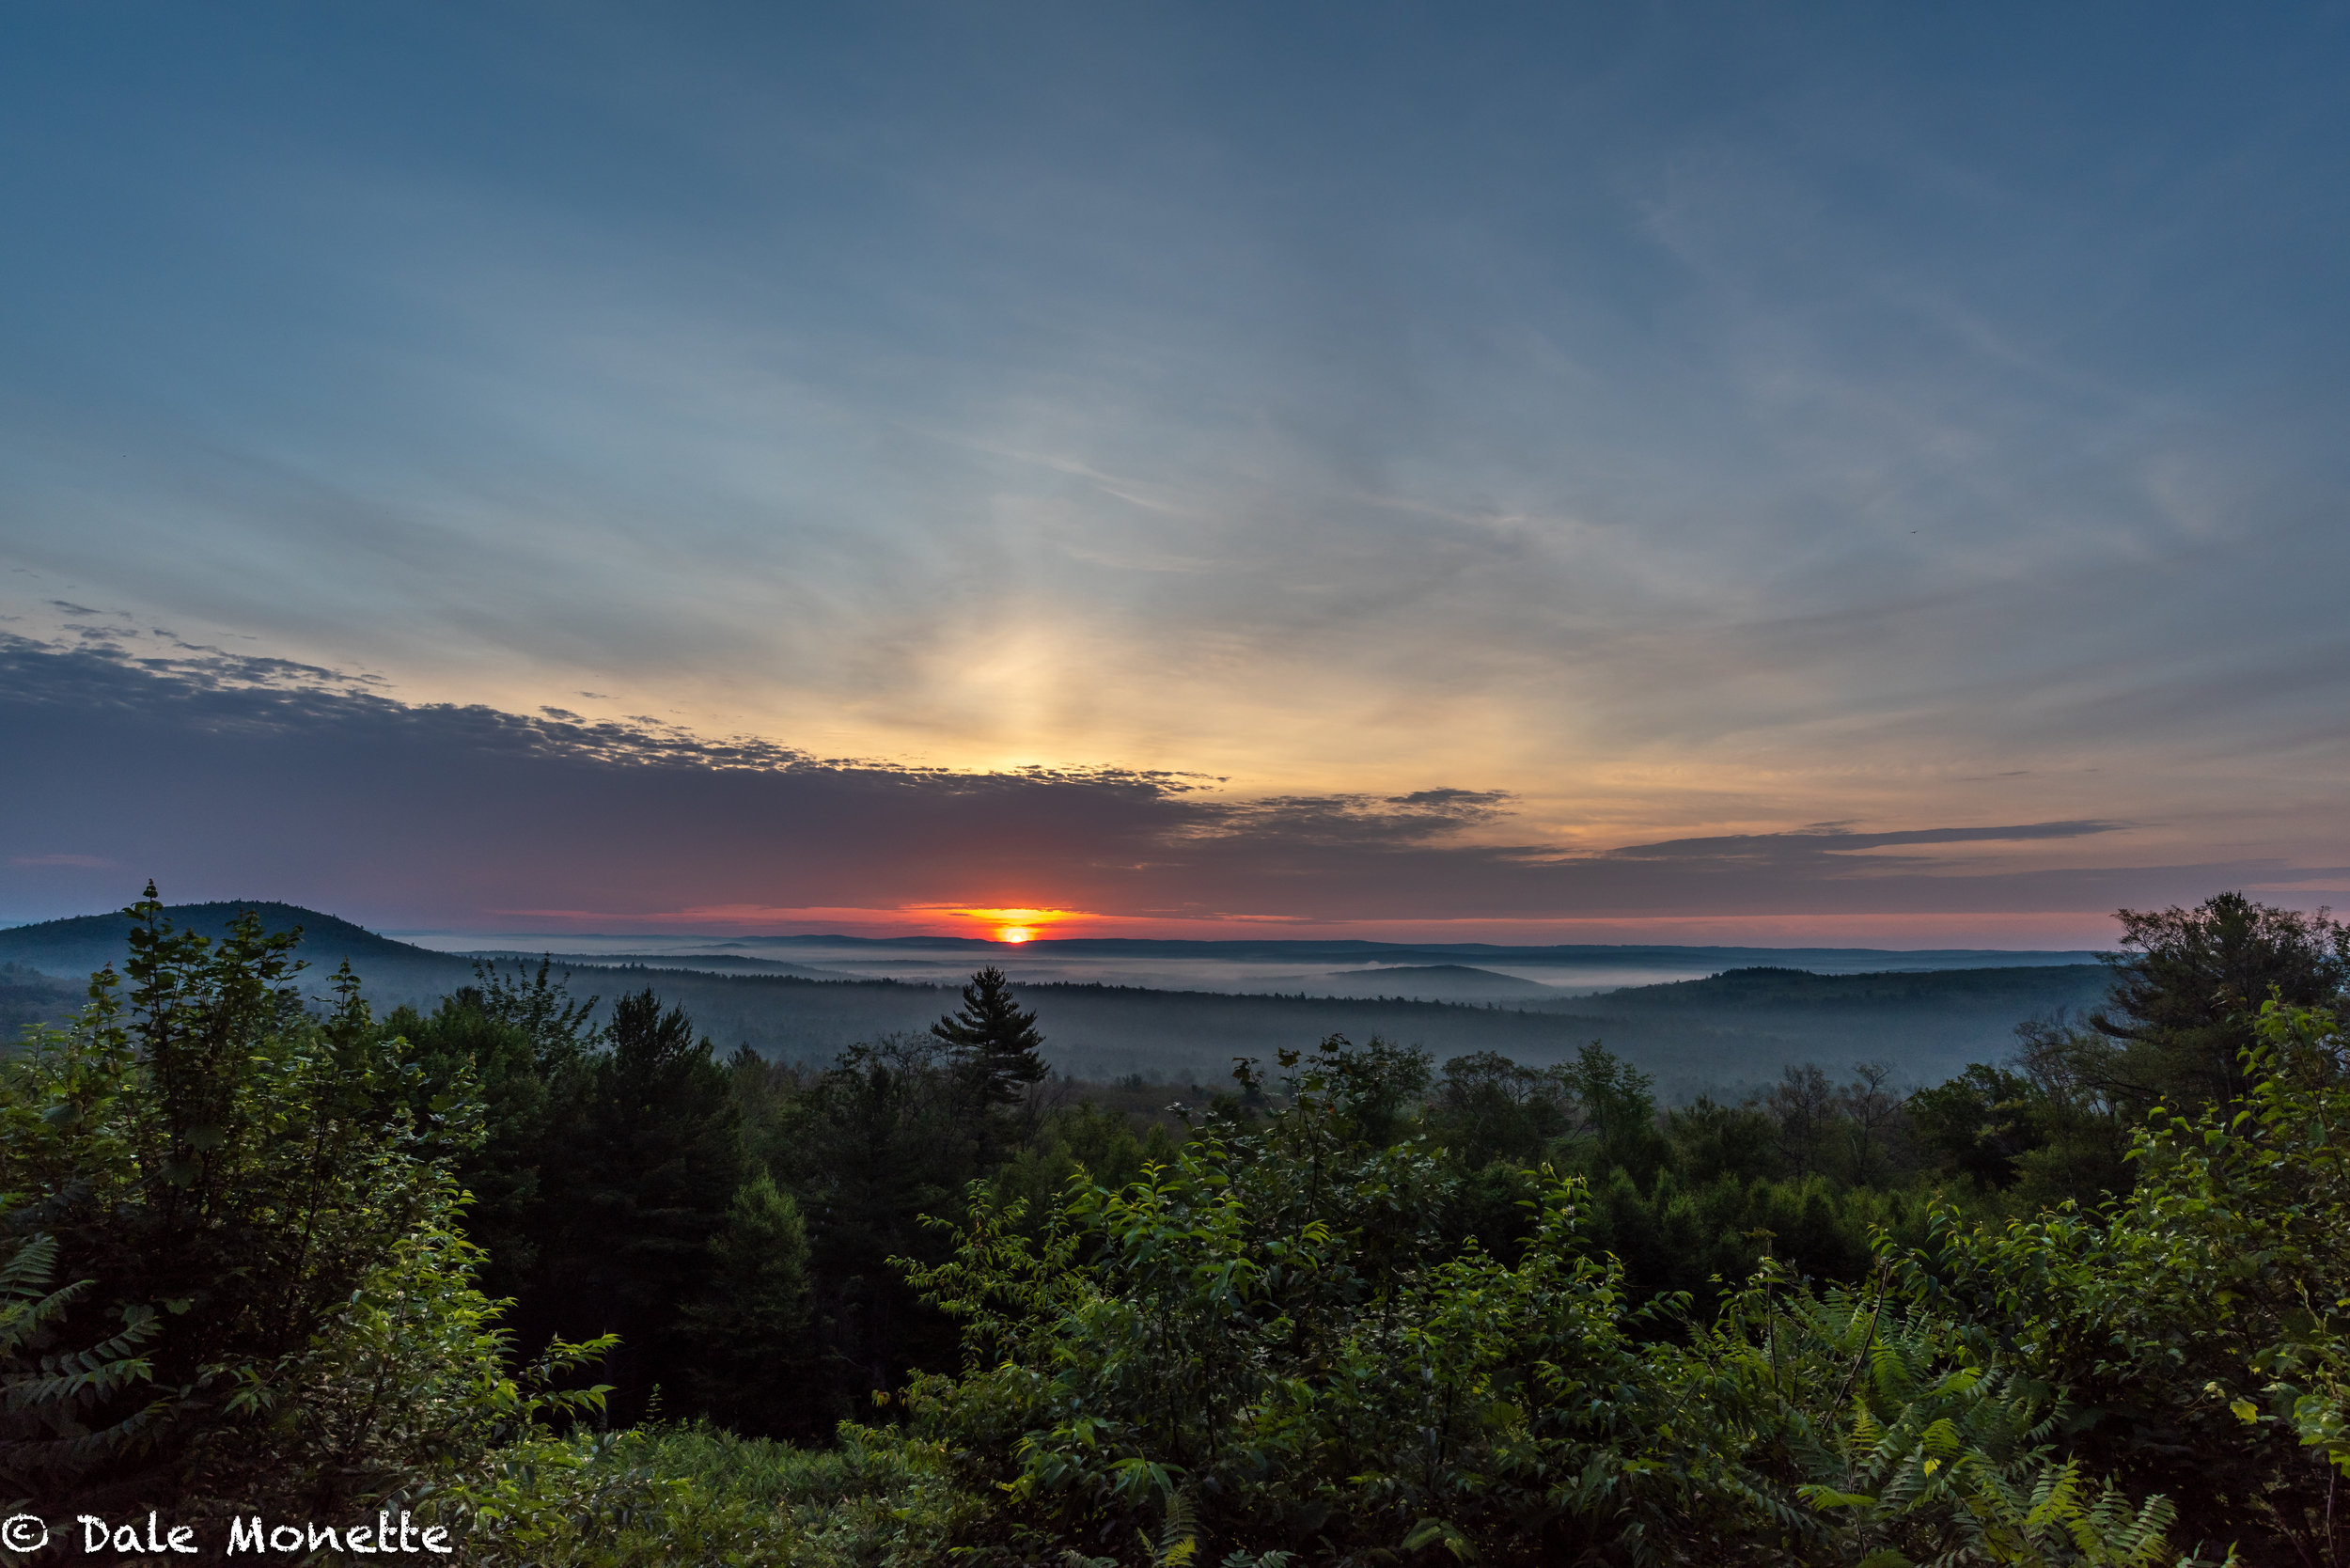   Its been a while since I took a sunrise image !  New Salem Lookout,  6/30/18.   